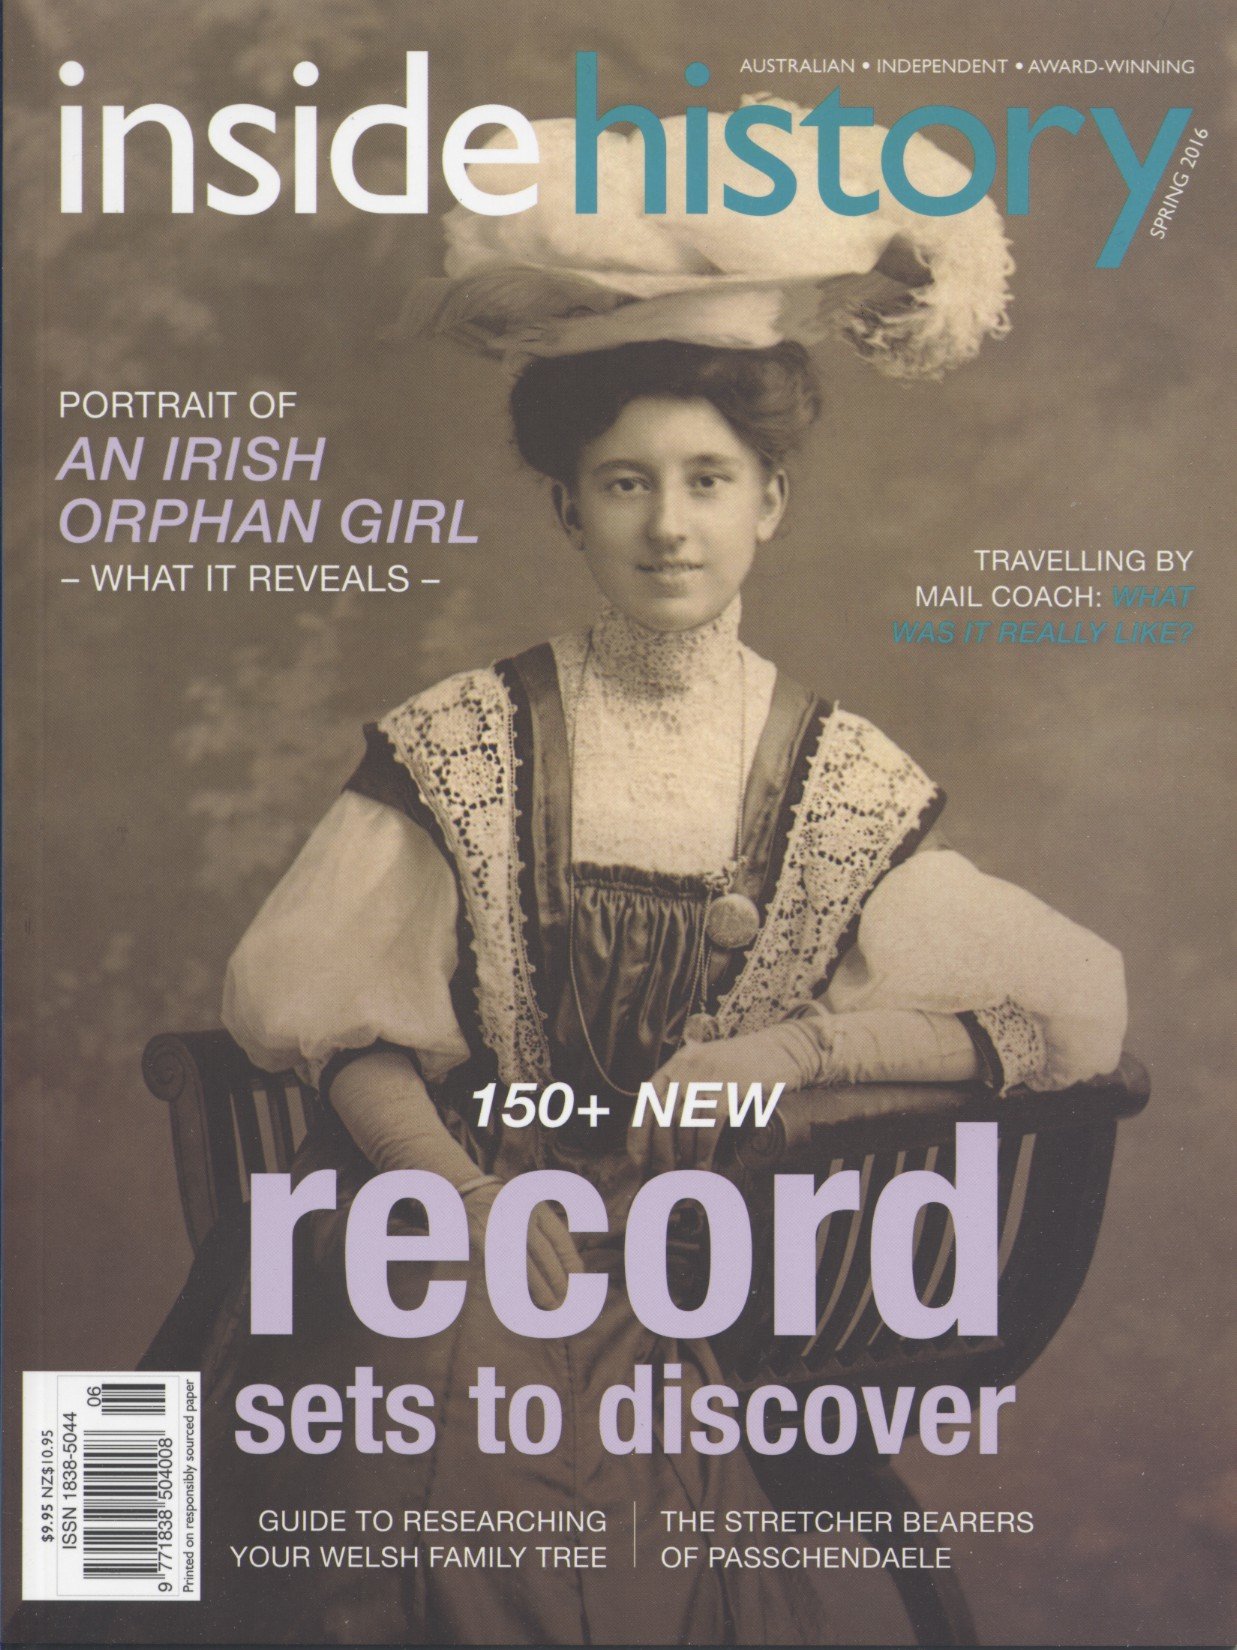 Inside History Magazine – Issue 36 (Spring 2016) is Out Now